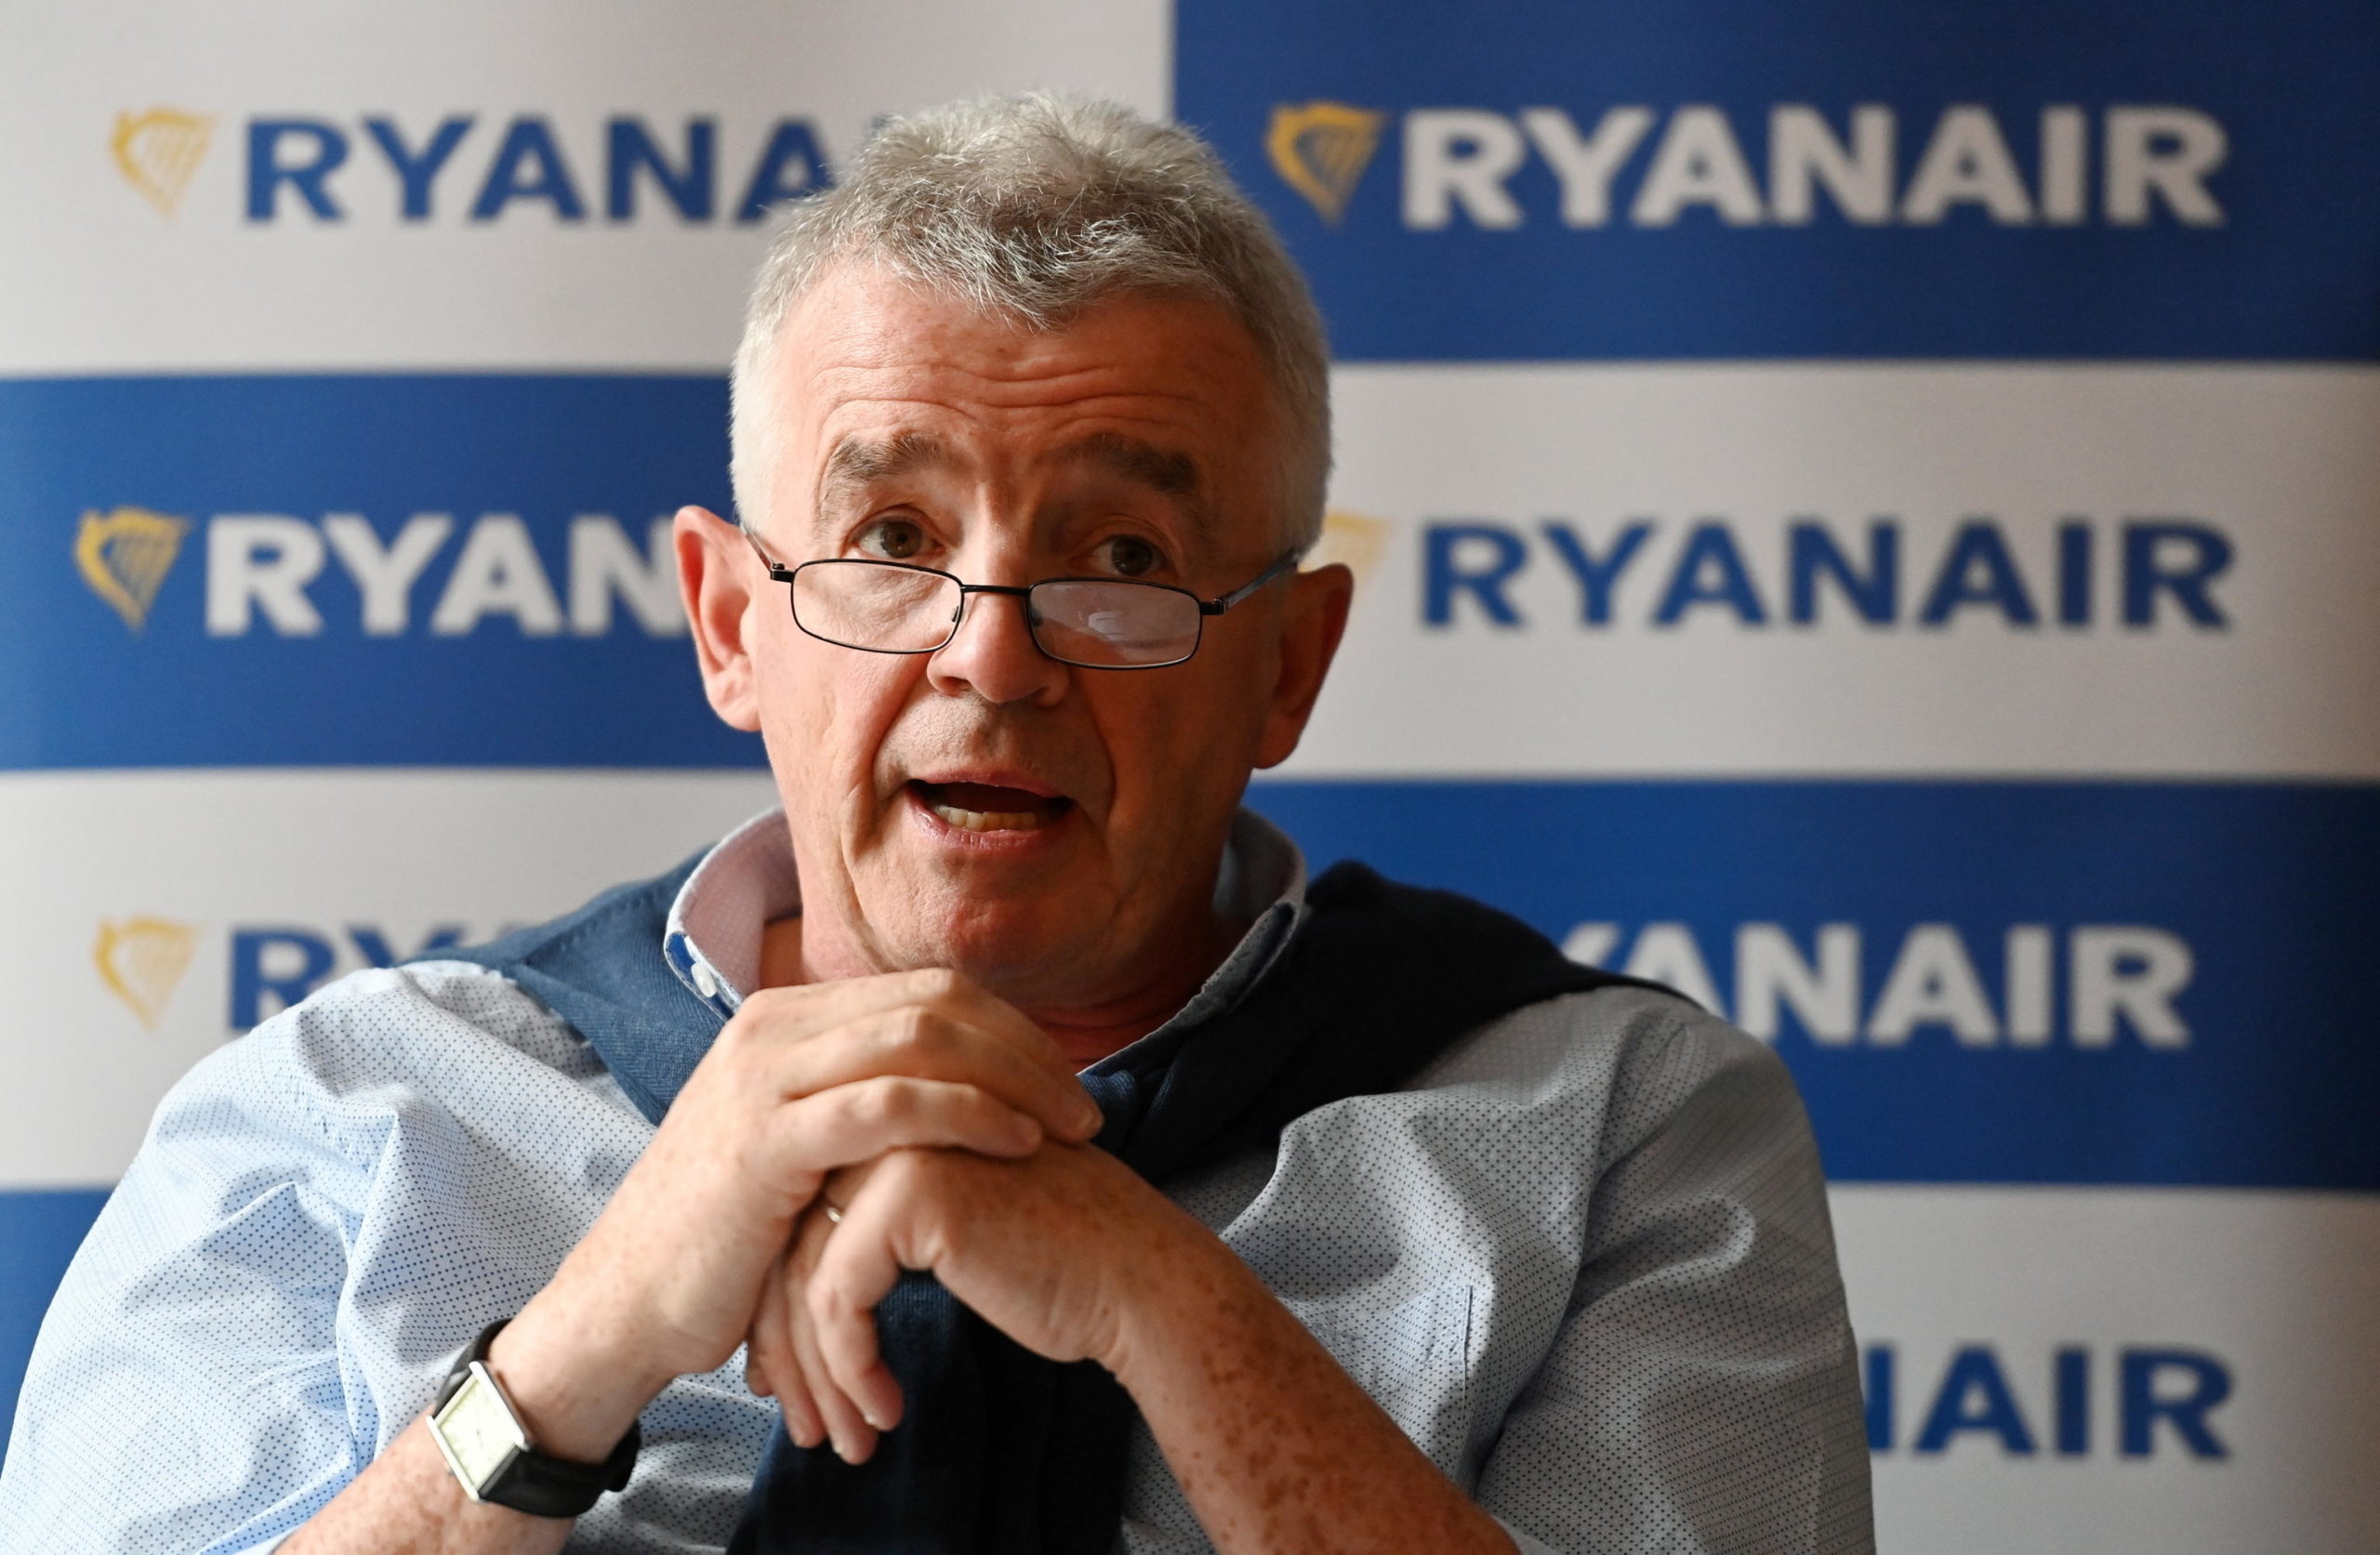 epa09438450 Ryanair CEO Michael O'Leary speaks to the media during a press conference in London, Britain, 31 August 2021. Ryanair chief Michael O'Leary announced his airlines winter 2021 schedule and said he wants to encourage the UK government to do away with PCR testing for fully vaccinated travellers.  EPA/ANDY RAIN